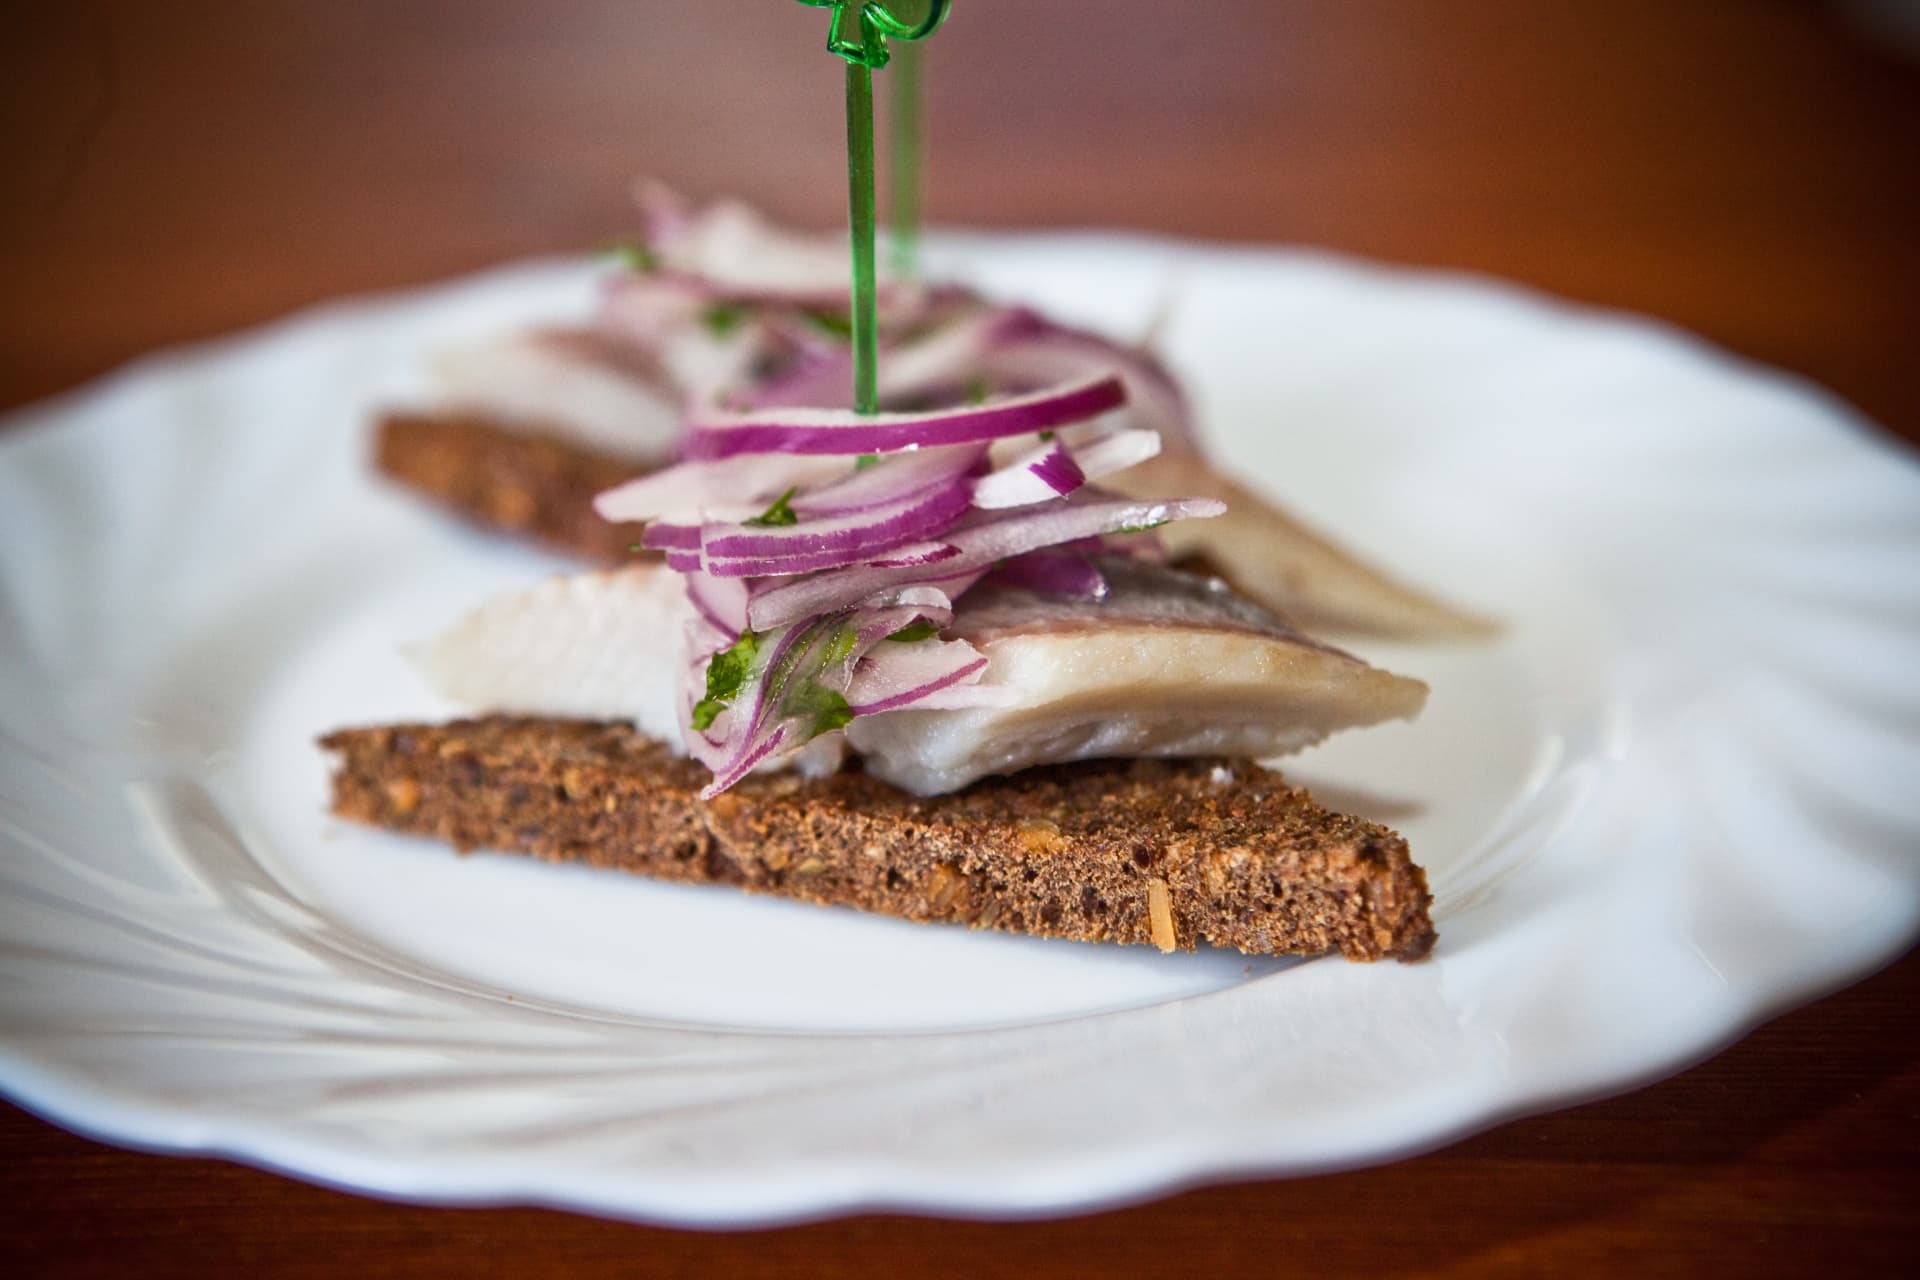 Canapés with Herring and Rye Bread